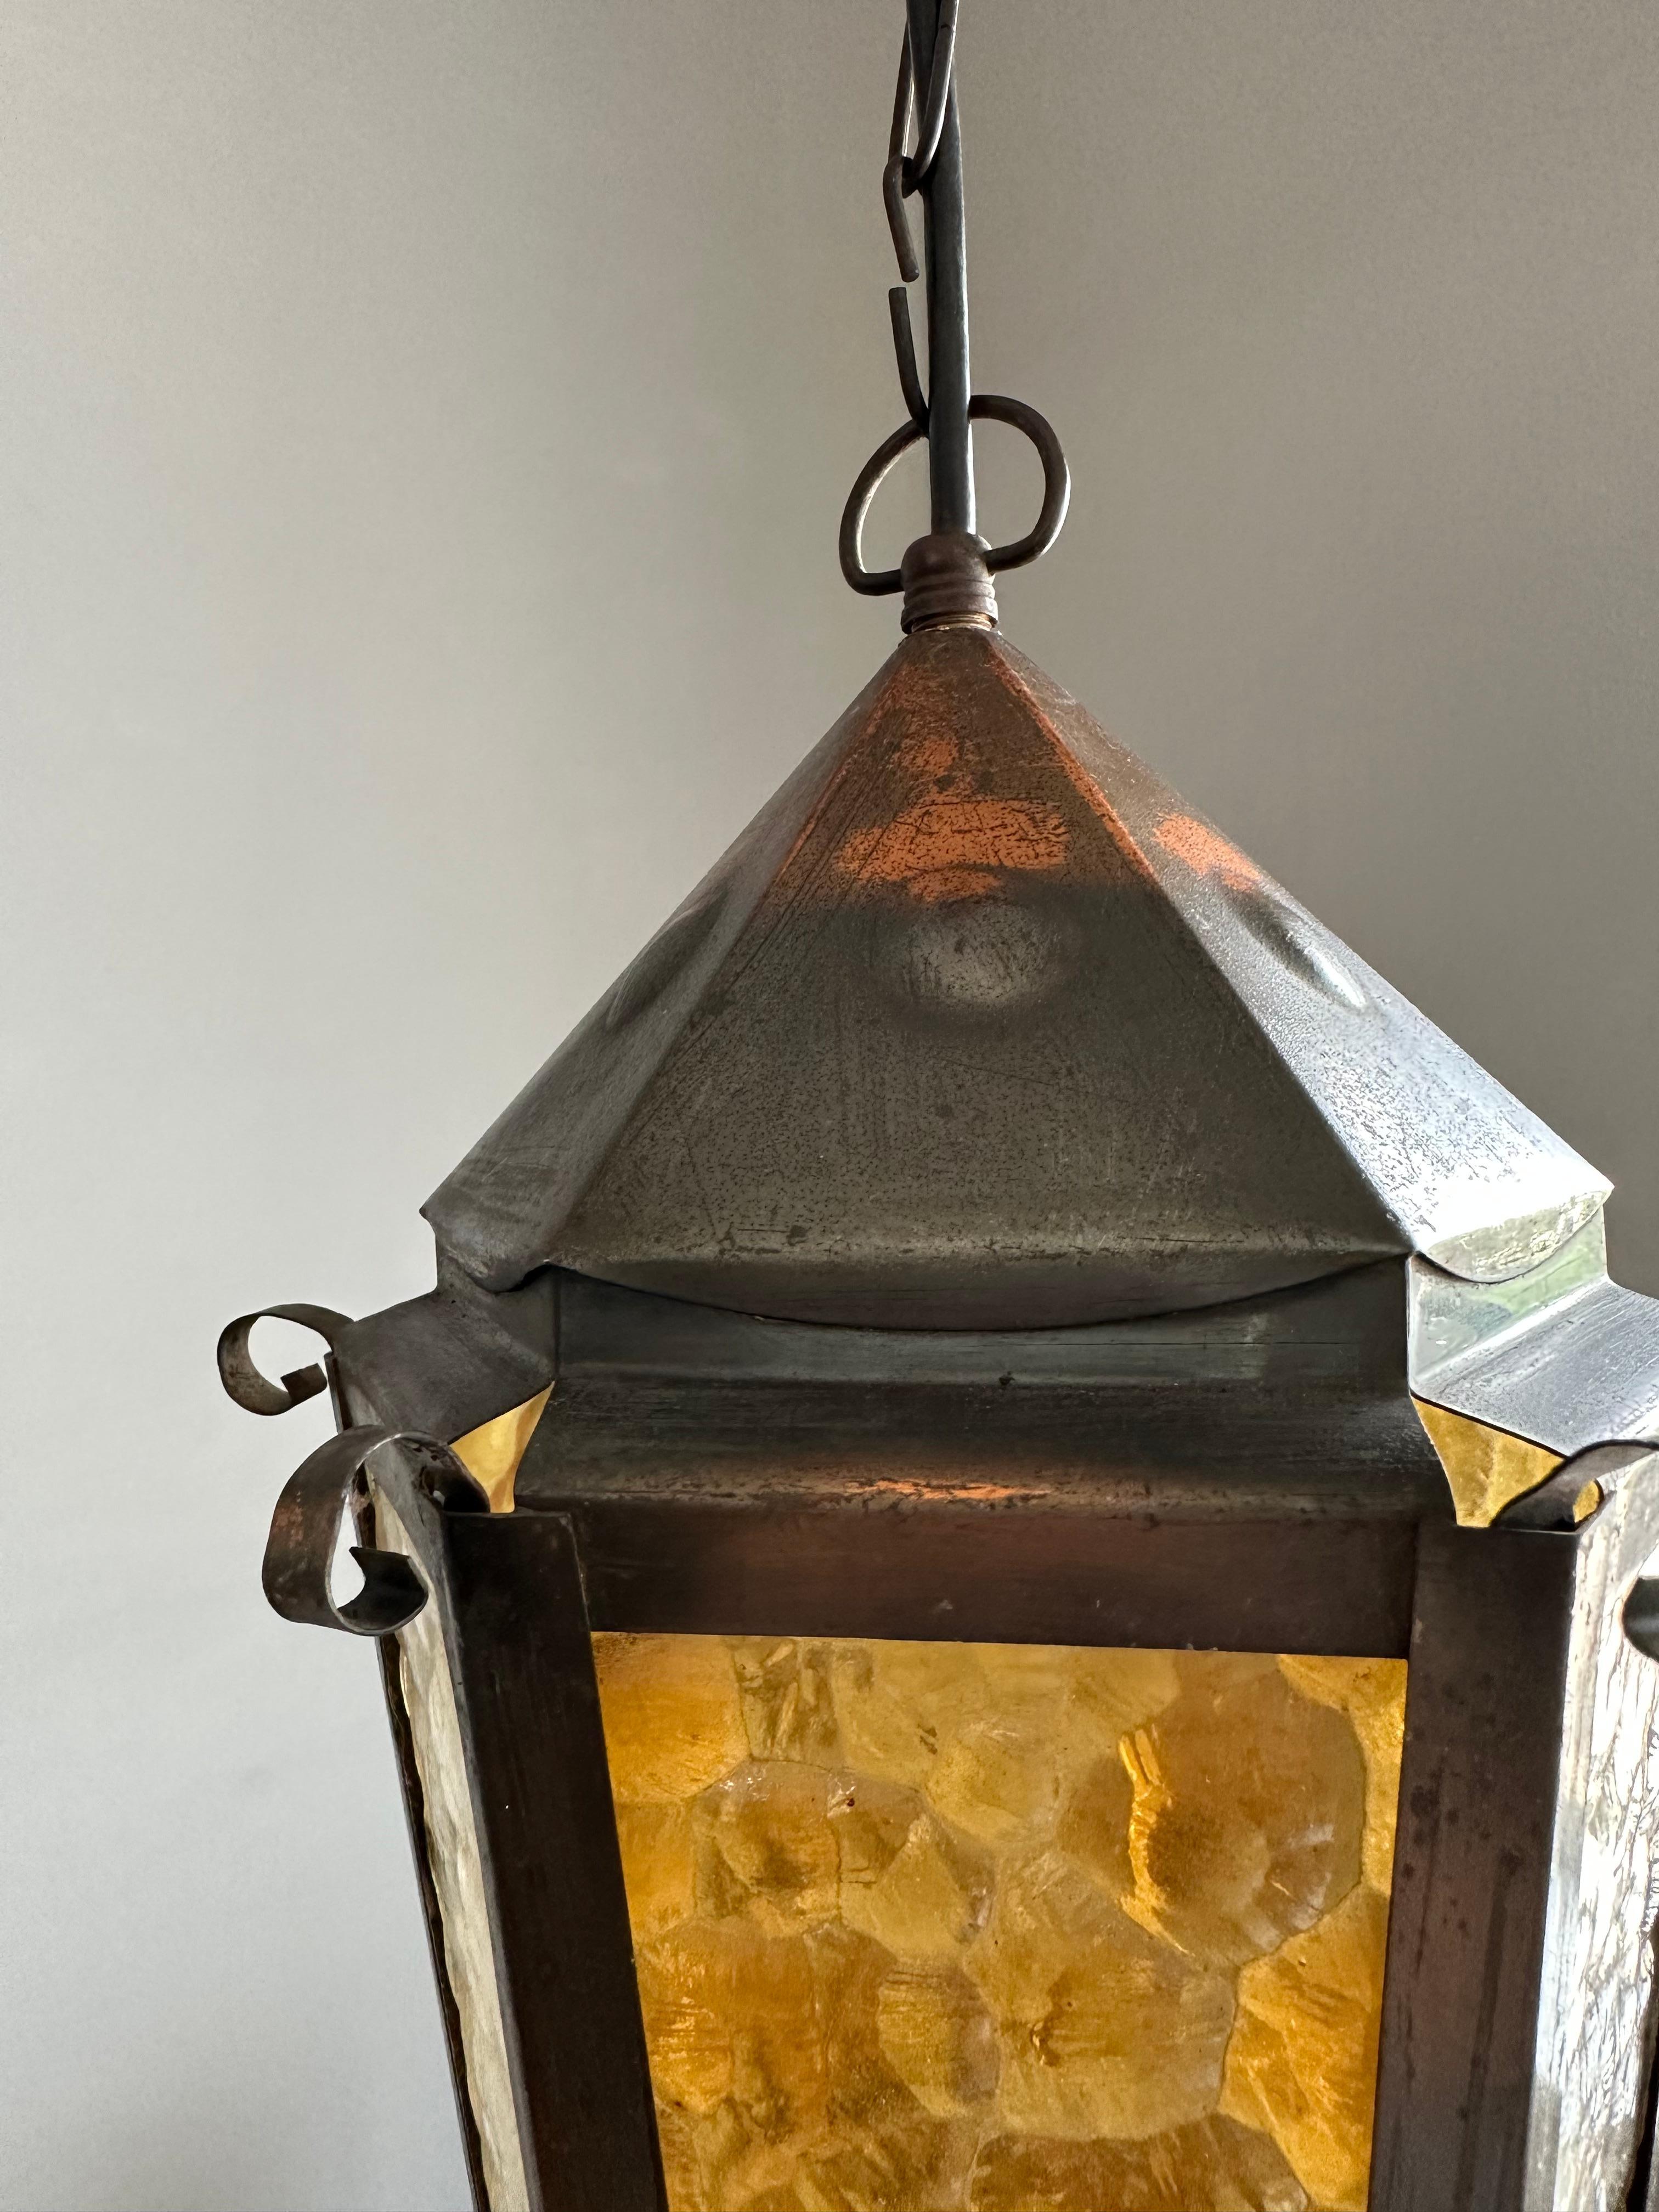 Hand-Crafted Small Arts & Crafts Brass and Colored Glass Hexagonal Lantern / Pendant Light